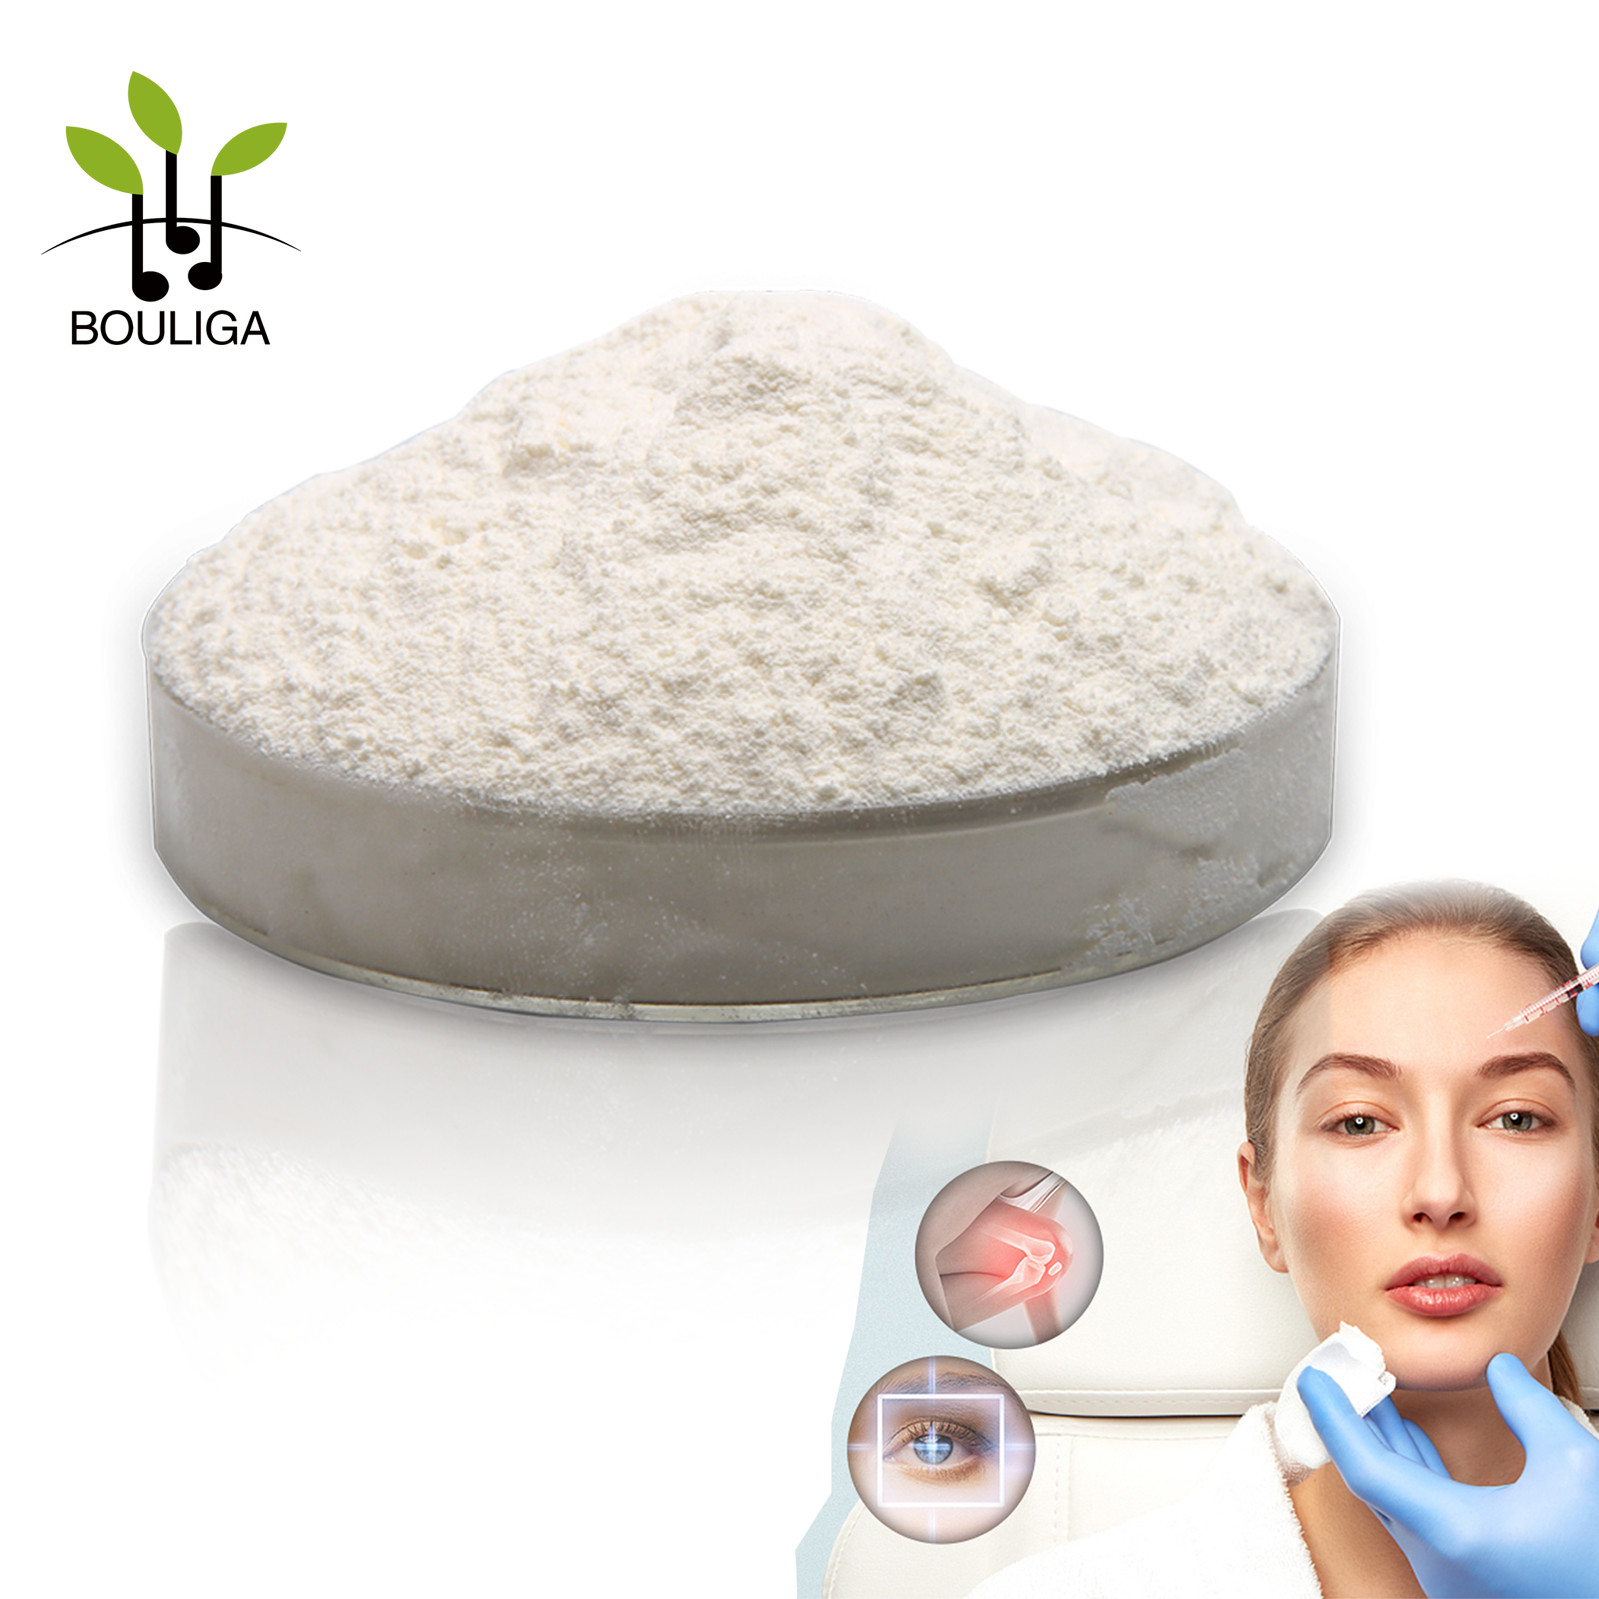 Used in Surgery and Eye Drop Sodium Hyaluronate Powder Pharmaceutical Grade Raw Material